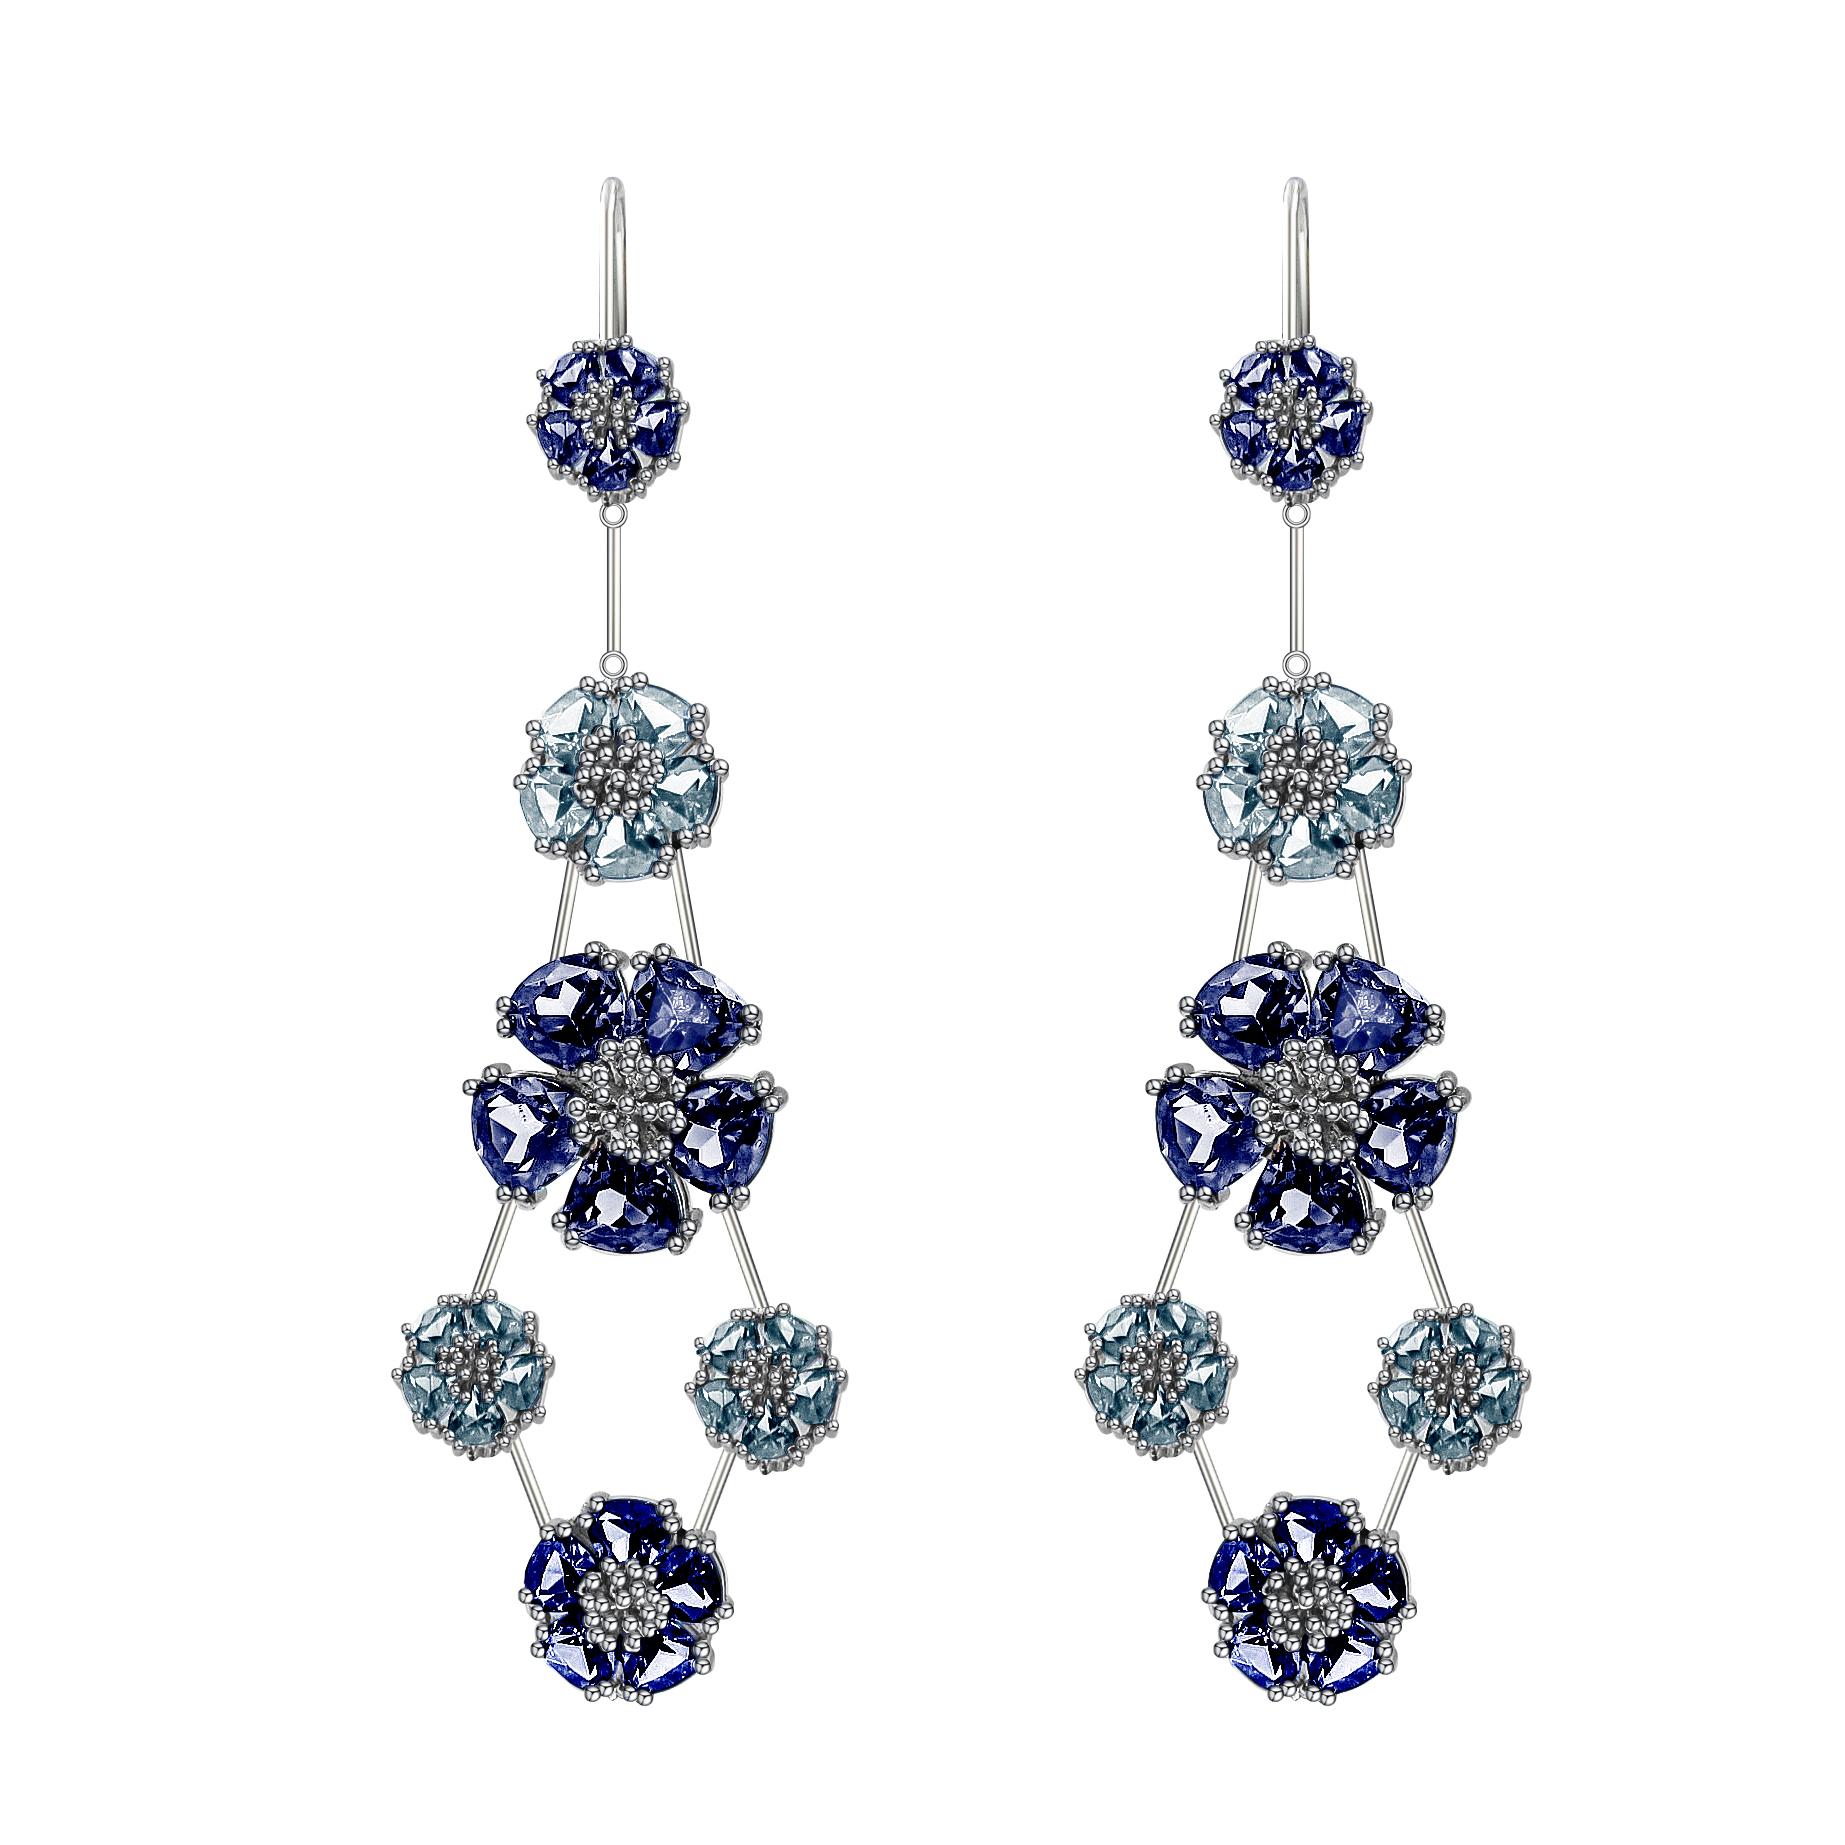 Designed in NYC

.925 Sterling Silver 6 x 7mm, 10 mm and 15 mm White Topaz and Black Spinel Blossom Double-Tier Chandelier Earrings. No matter the season, allow natural beauty to surround you wherever you go. Blossom double-tier chandelier earrings: